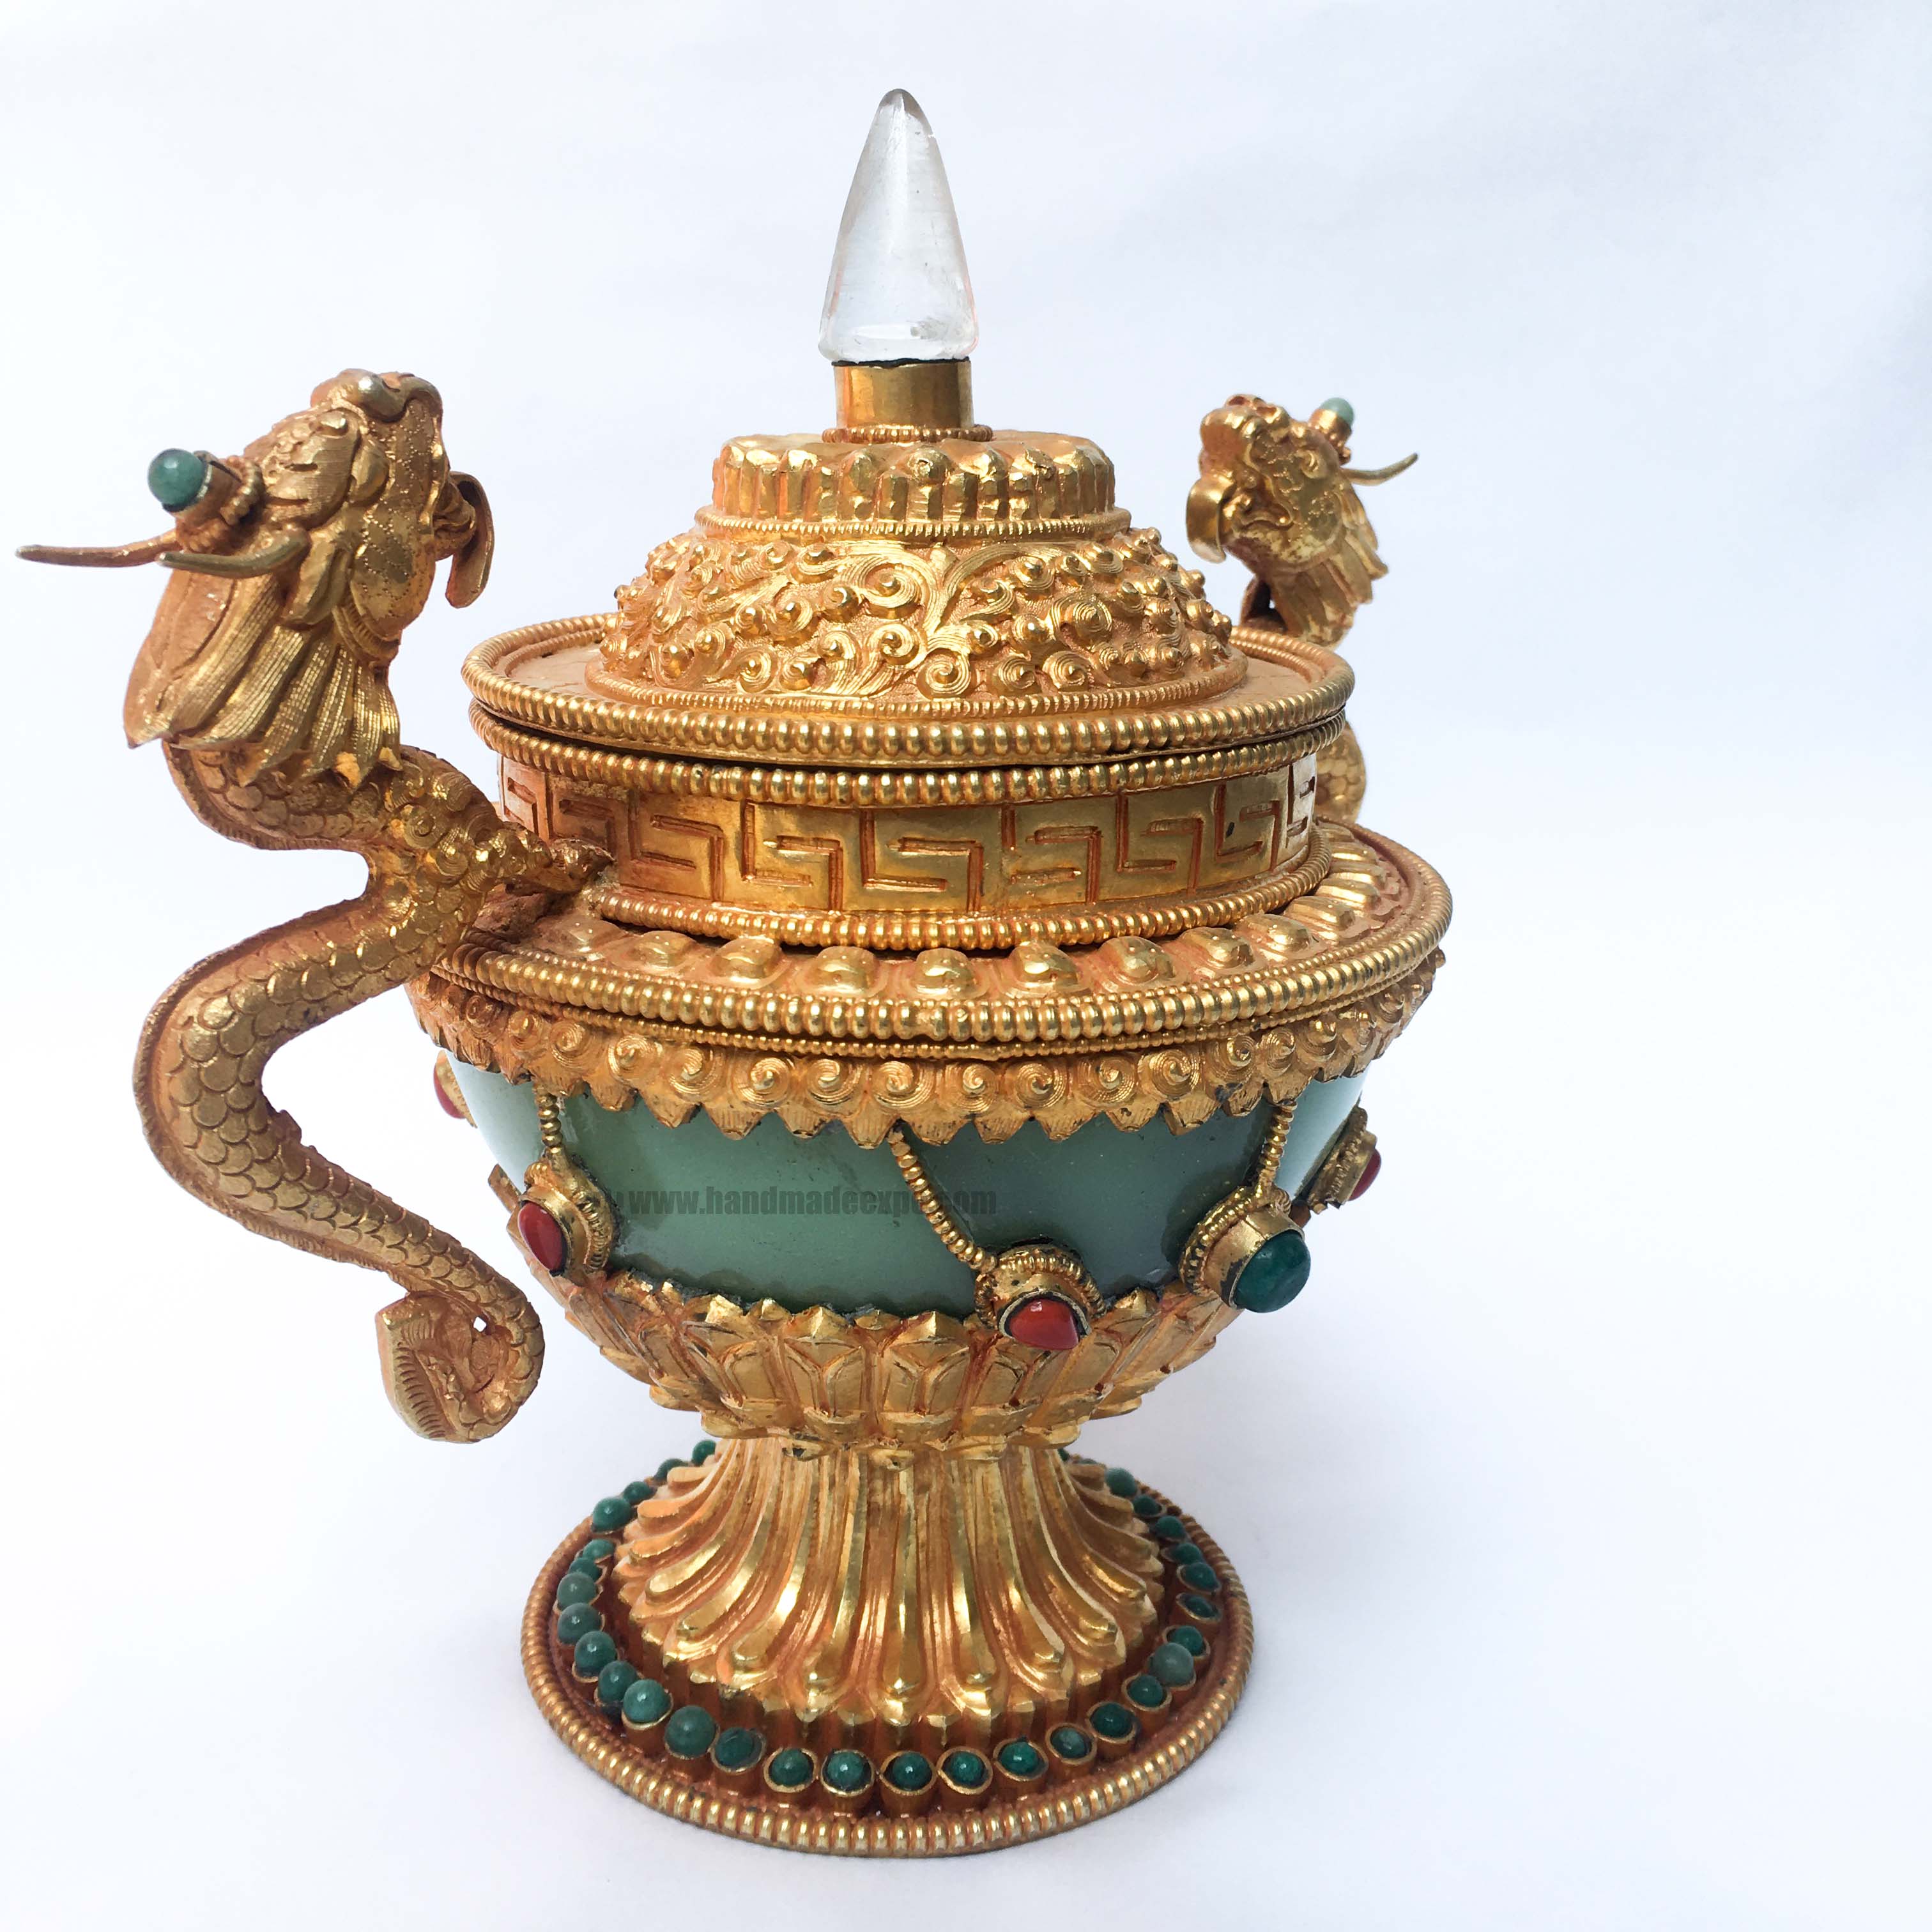 Imitation Jade Dophor, Nesi, Vessel For Offering Rice, With Dragon Design And Stone And metal Setting, gold Plated, hong Kong Jade